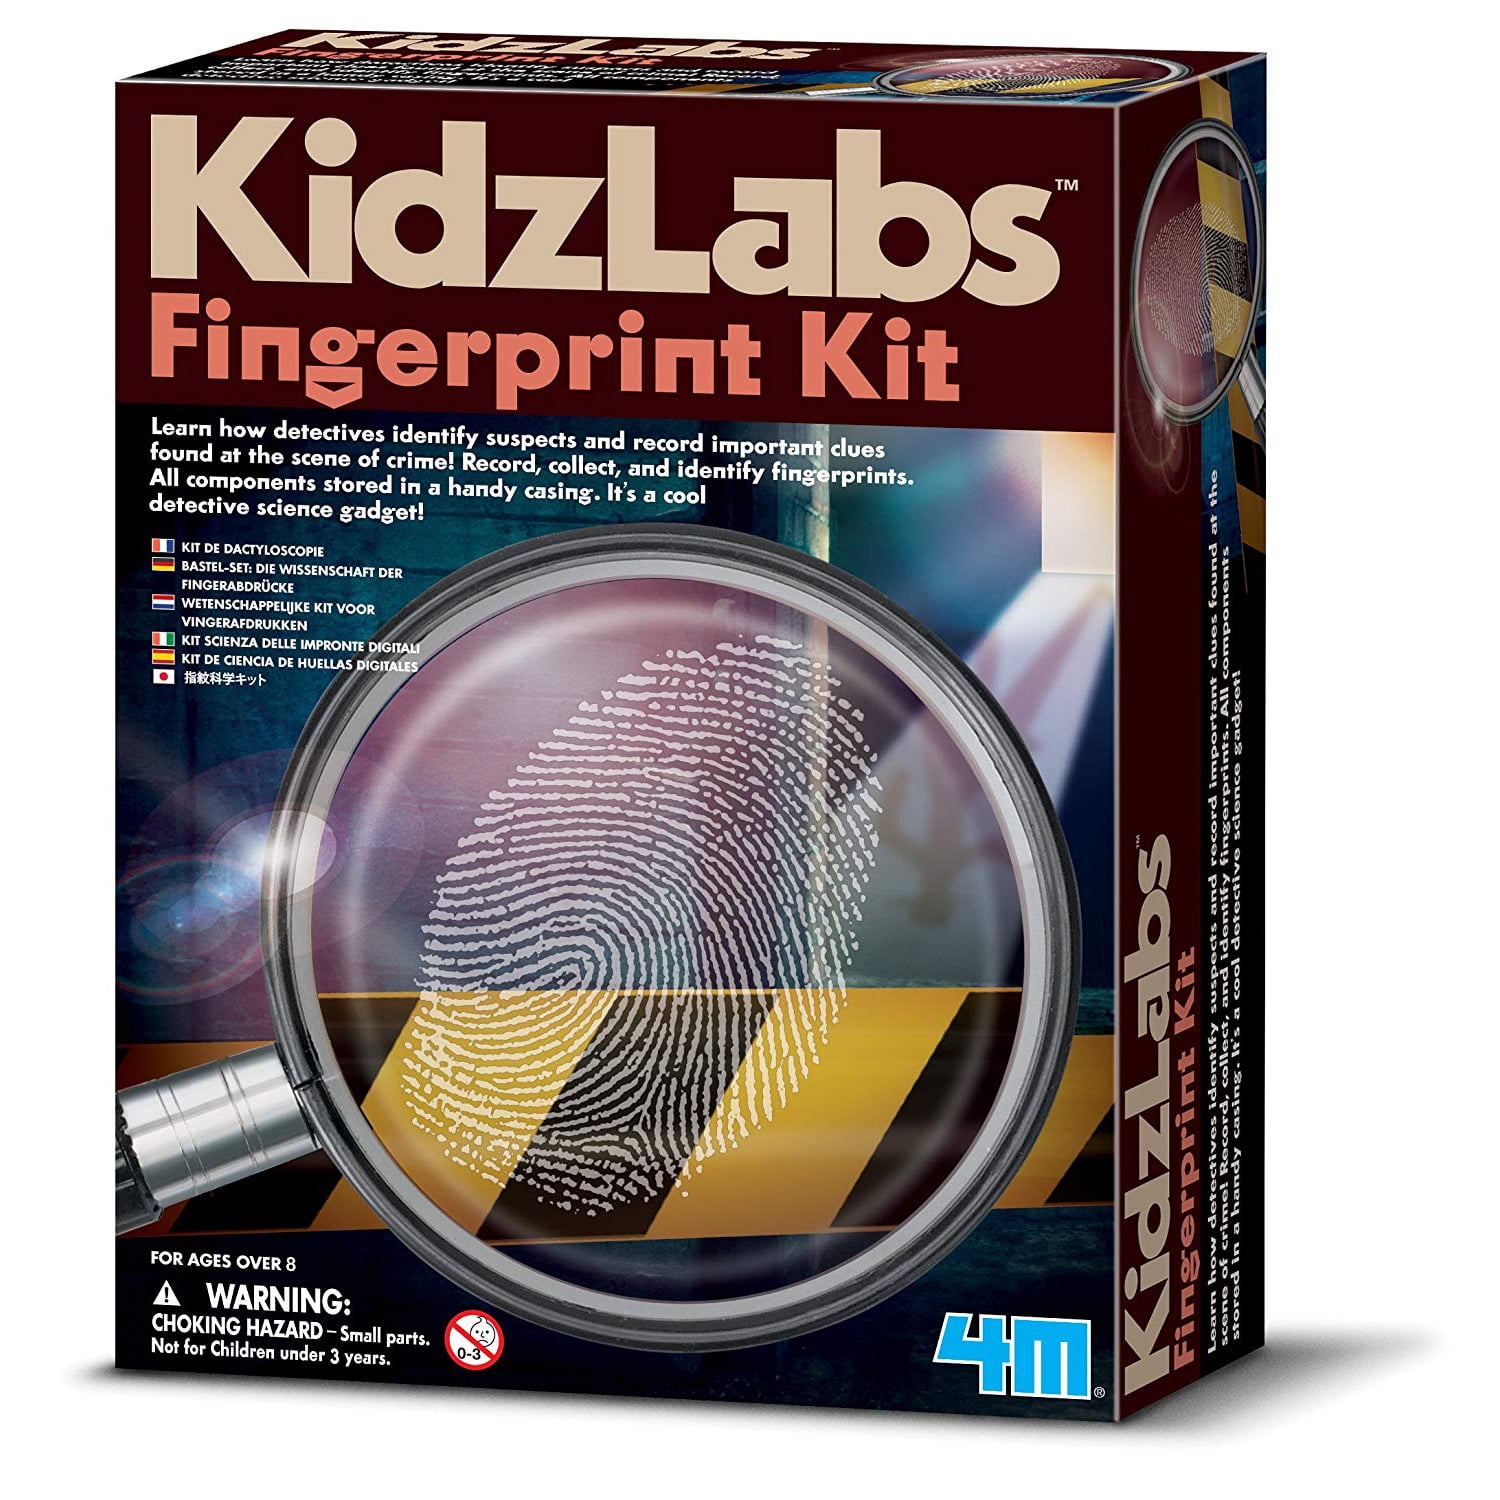 Toy Blue Frog Toys Fingerprint Kit Everything a Young Spy Needs to Dust for Fingerprints!